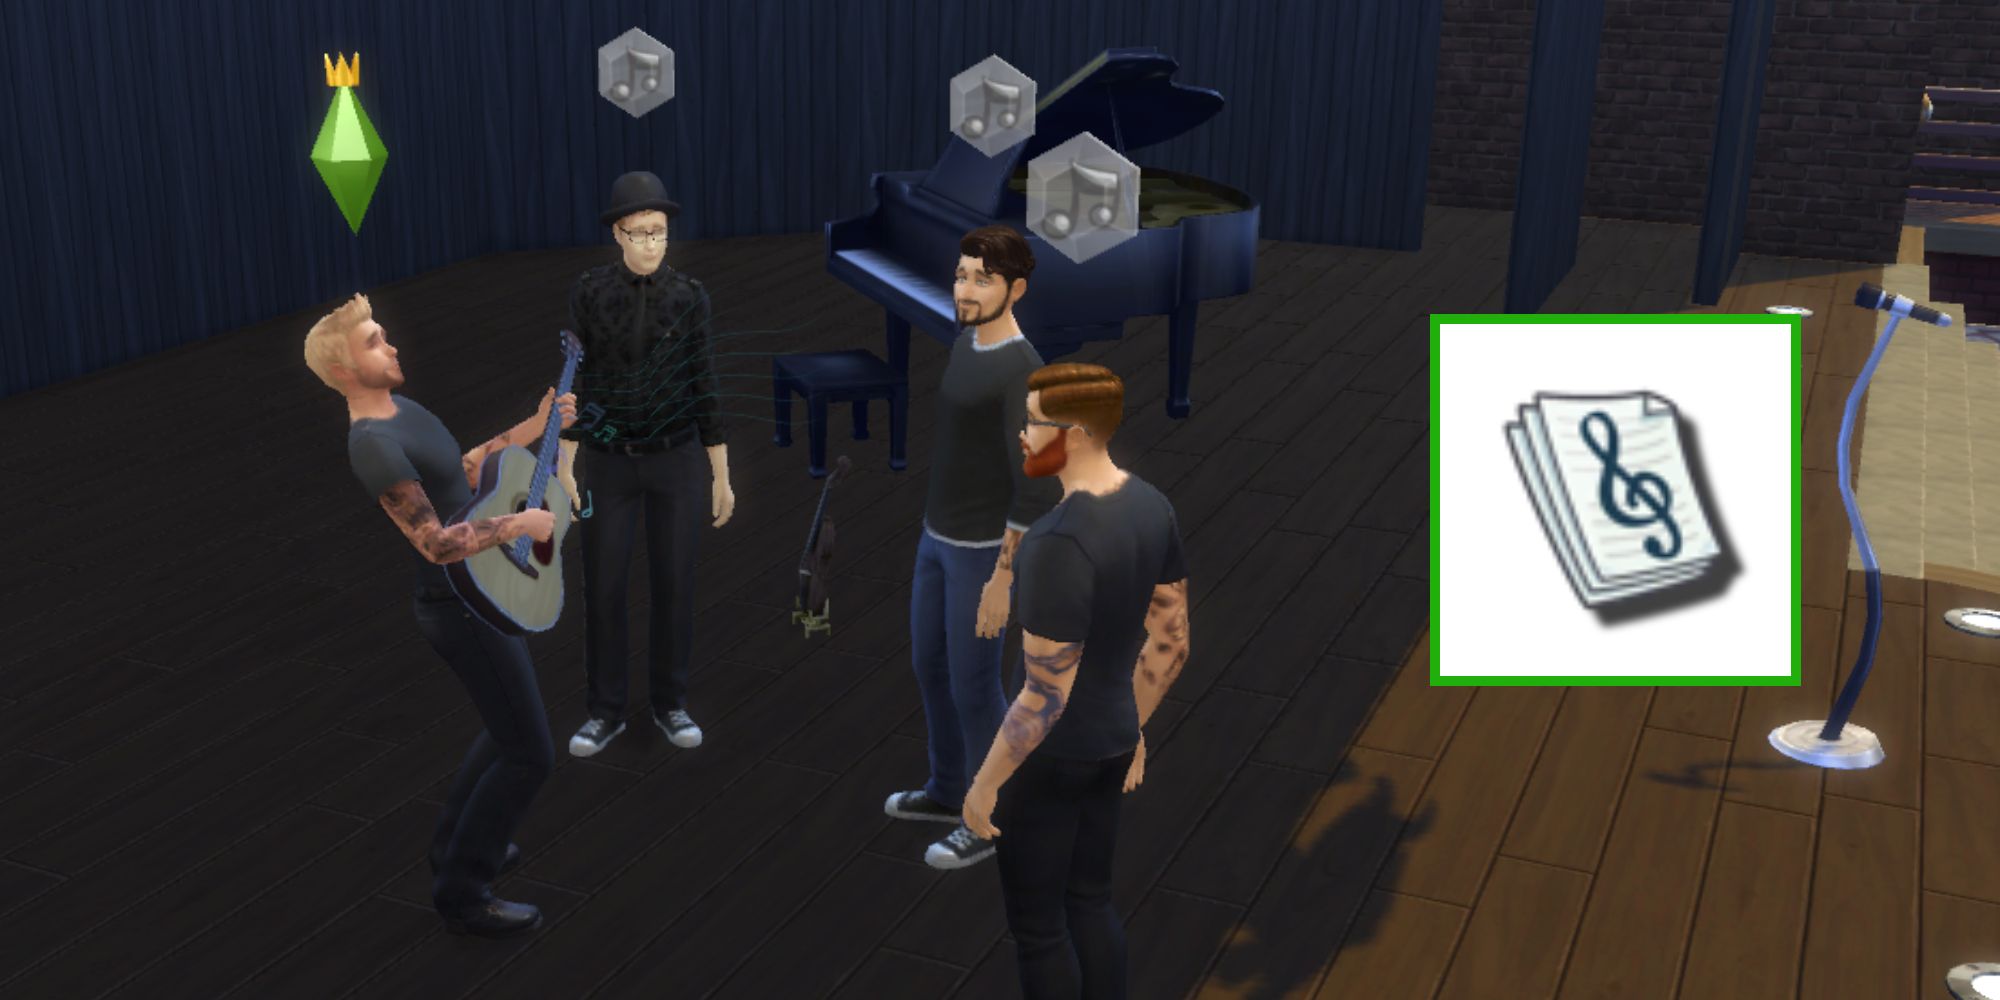 A Sim plays the guitar while his friends watch and the music lover trait icon is added to the photo